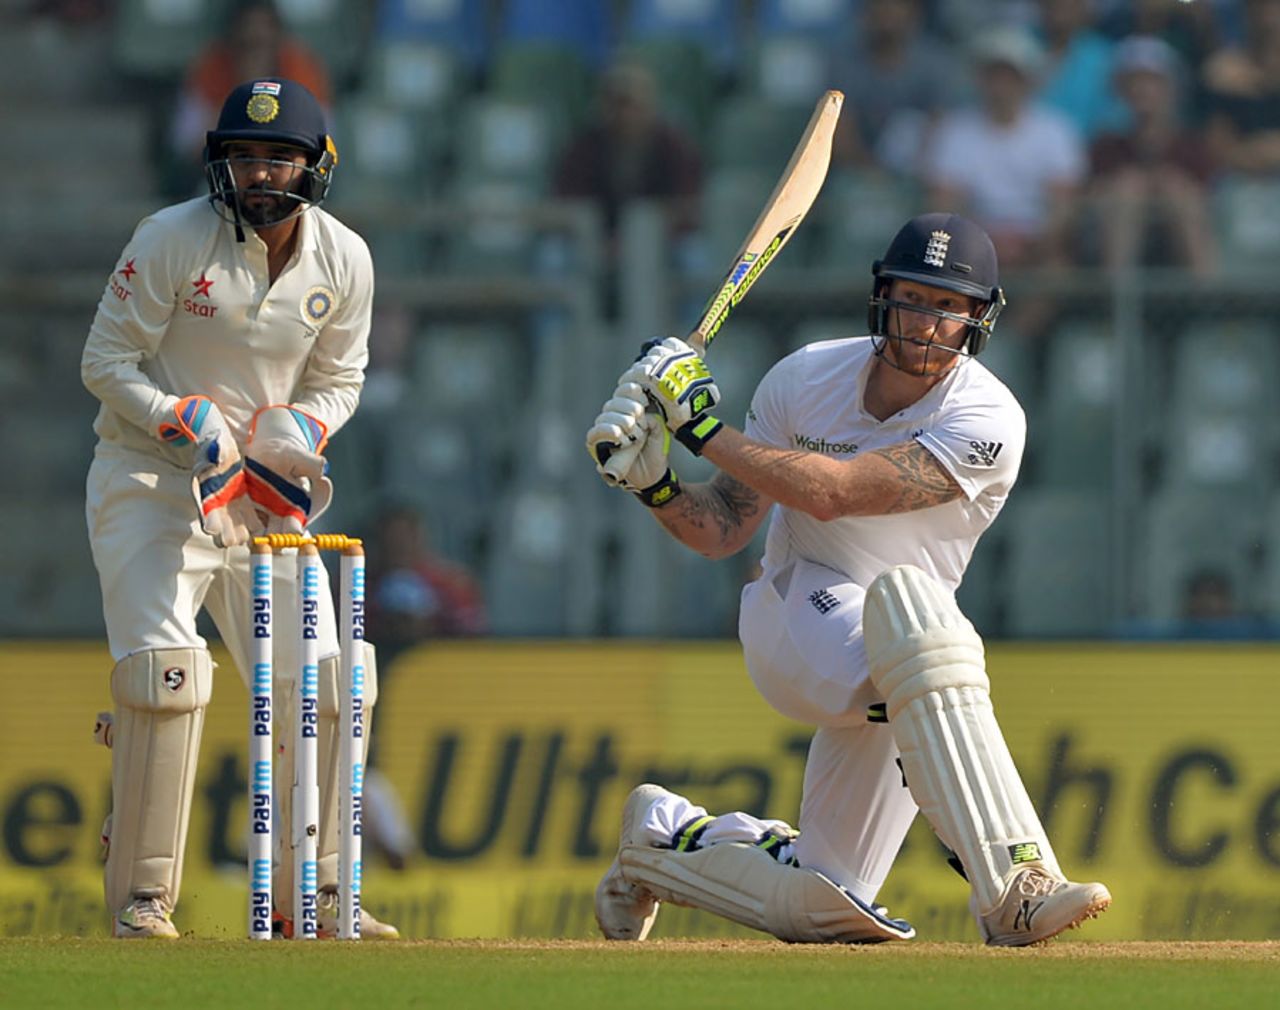 Ben Stokes showed positive intent early on the second day, India v England, 4th Test, Mumbai, 2nd day, December 9, 2016